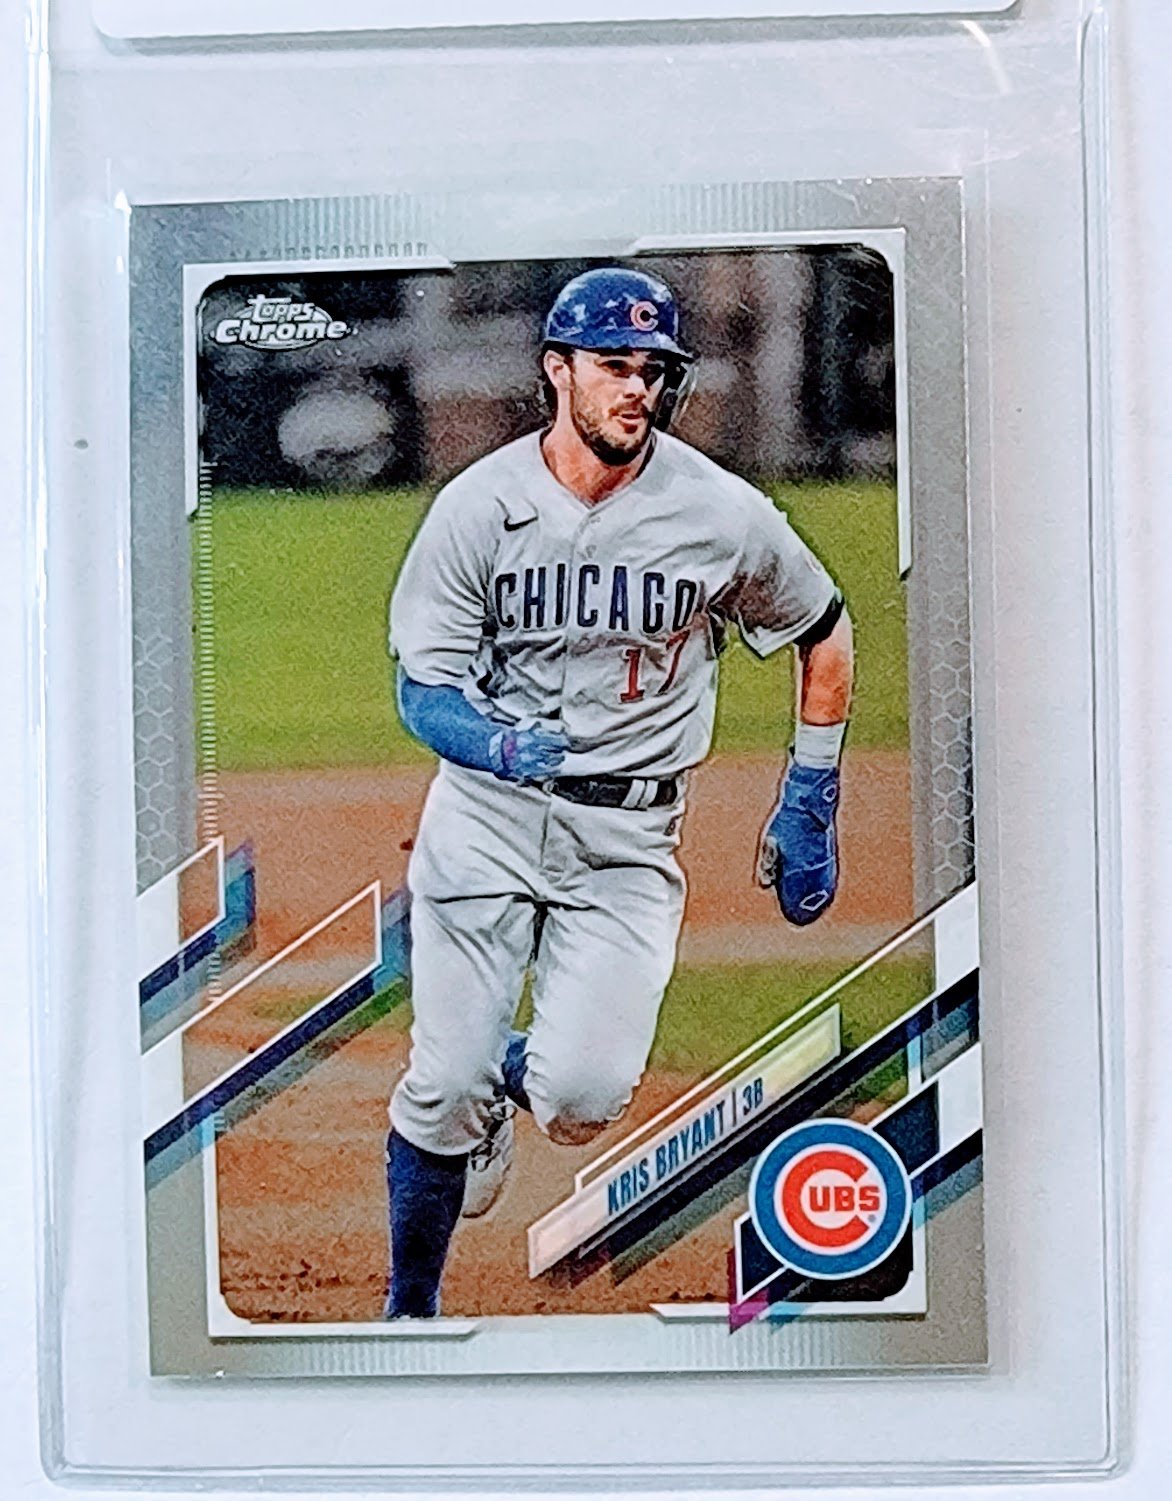 2021 Topps Chrome Kris Bryant Baseball Trading Card TPTV simple Xclusive Collectibles   